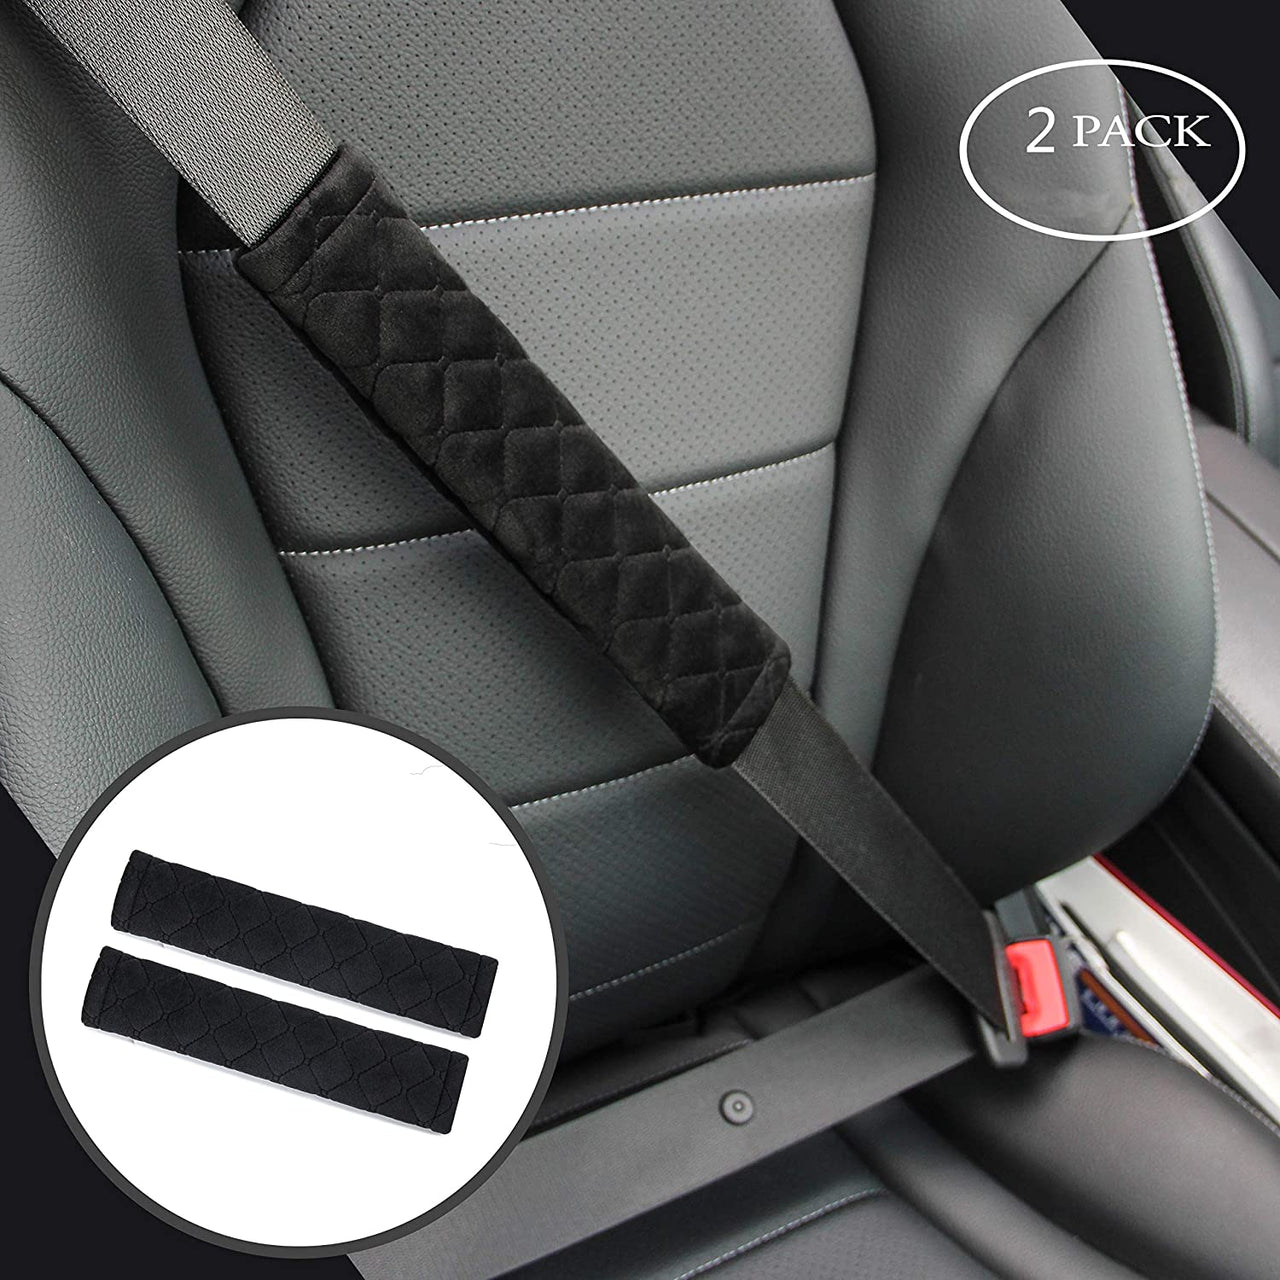 Soft Auto Seat Belt Cover Seatbelt Shoulder Pad Cushions 2 PCS Universal Fit for All Cars and Backpack for a More Comfortable Driving Car Accessories